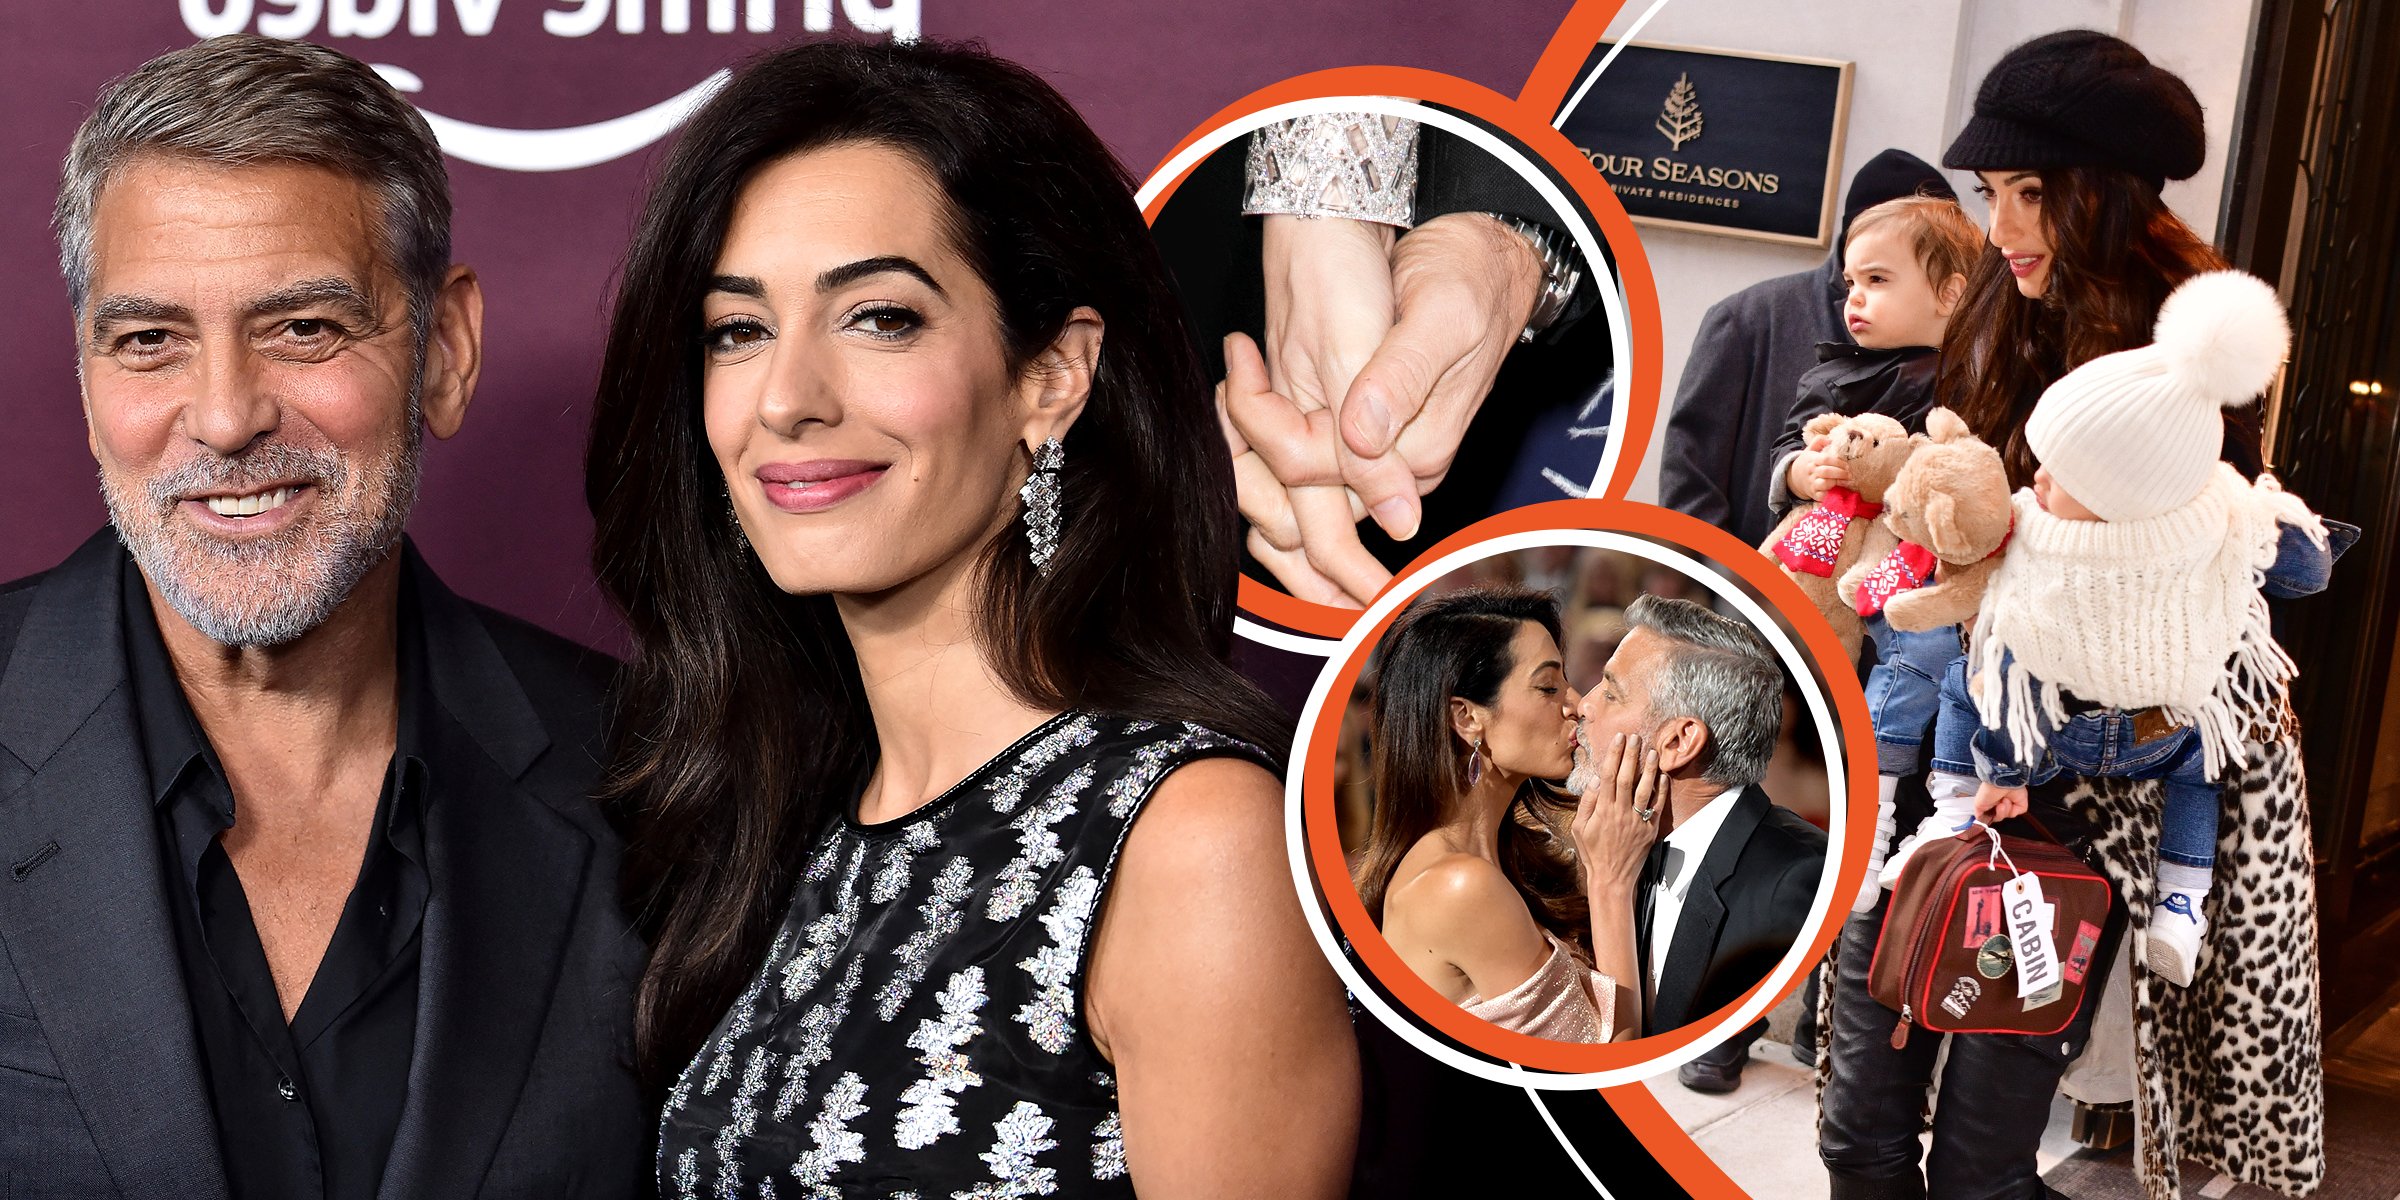 George and Amal Clooney | George and Amal Clooney holding hands | George and Amal Clooney share a kiss | Amal, Alexander, and Ella Clooney | Source: Getty Images 